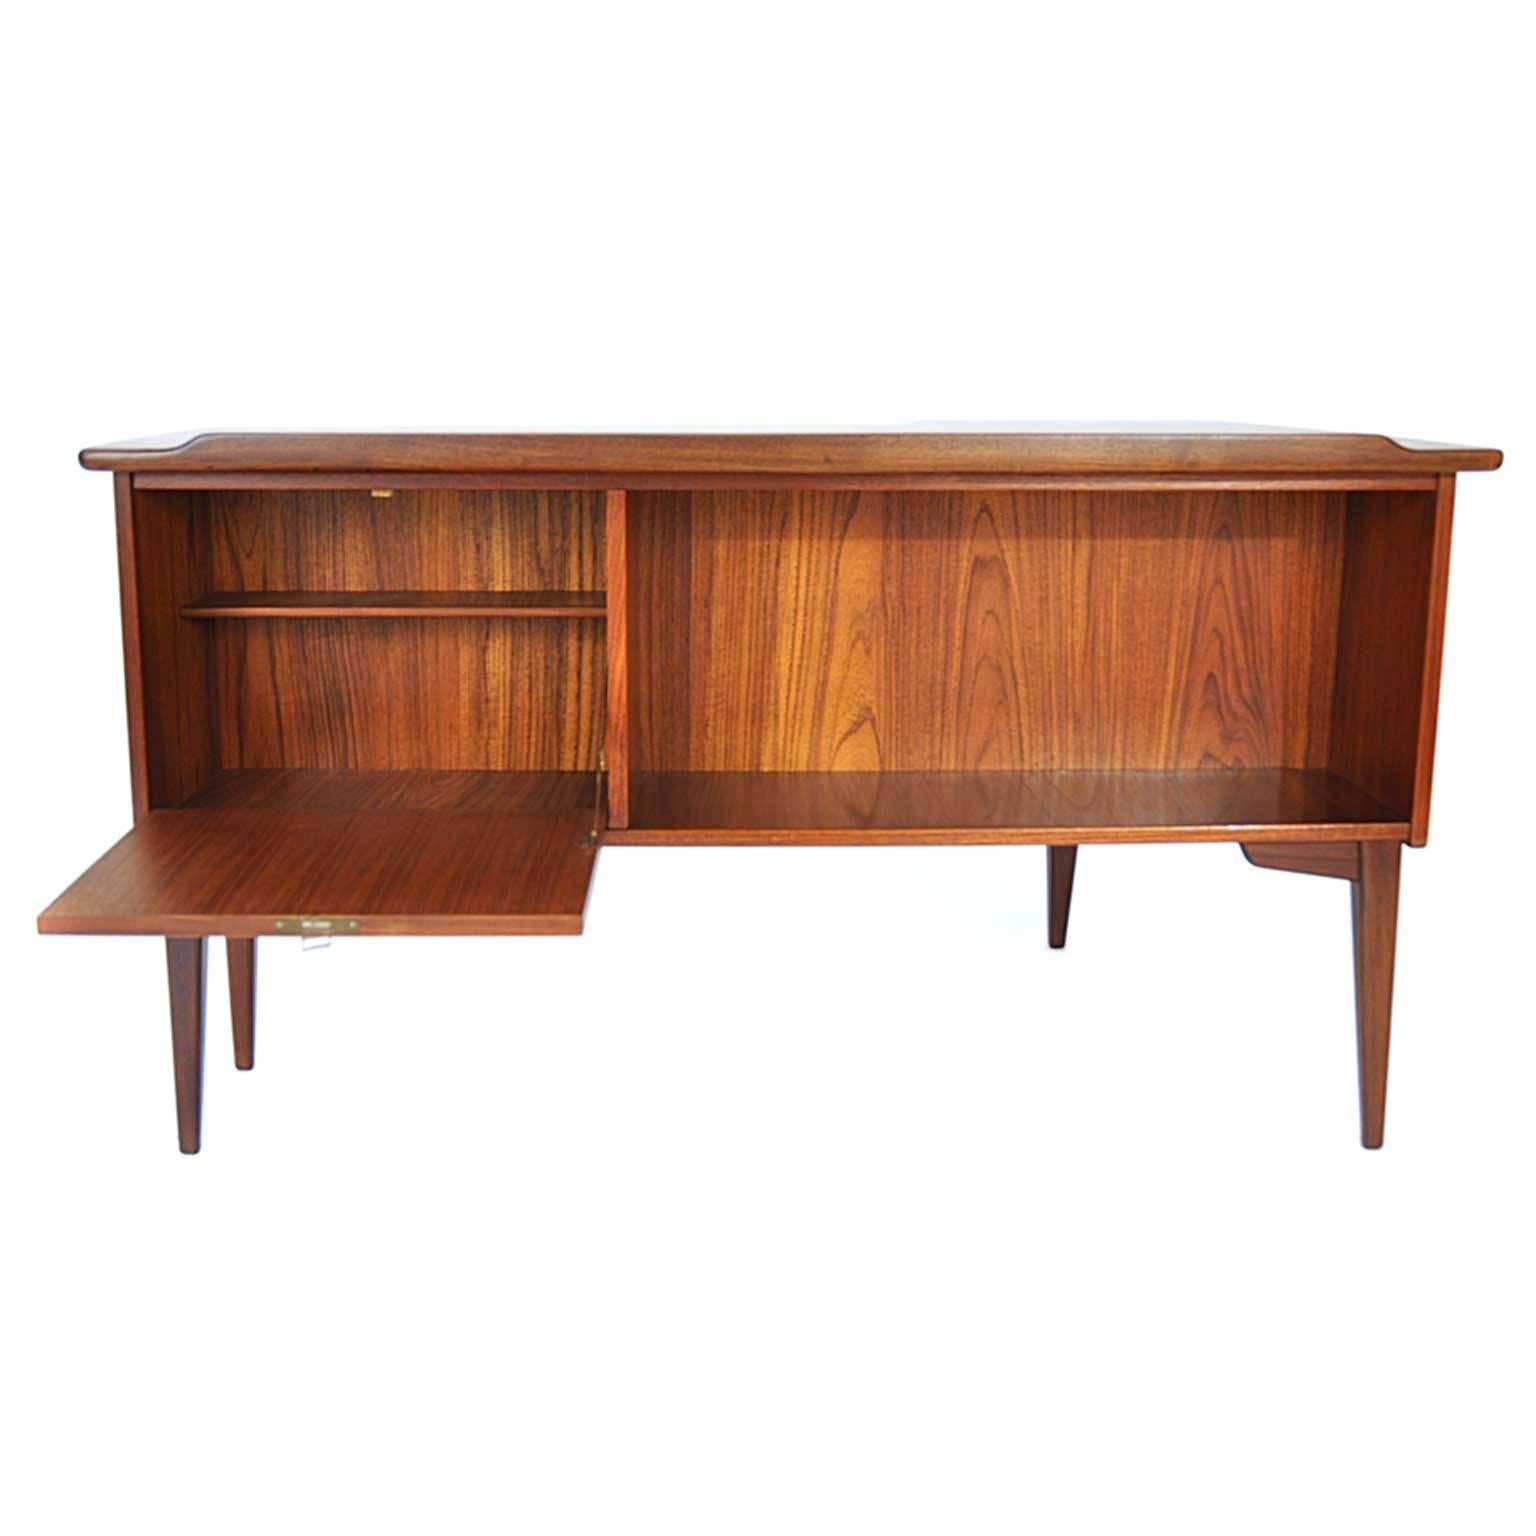 The desk was designed by Gunner Nielsen Tibergaard between 1950-1960 (Denmark). The piece is made of teak. There are three drawers, one of them is lockable. On the backside there is also a lockable case.